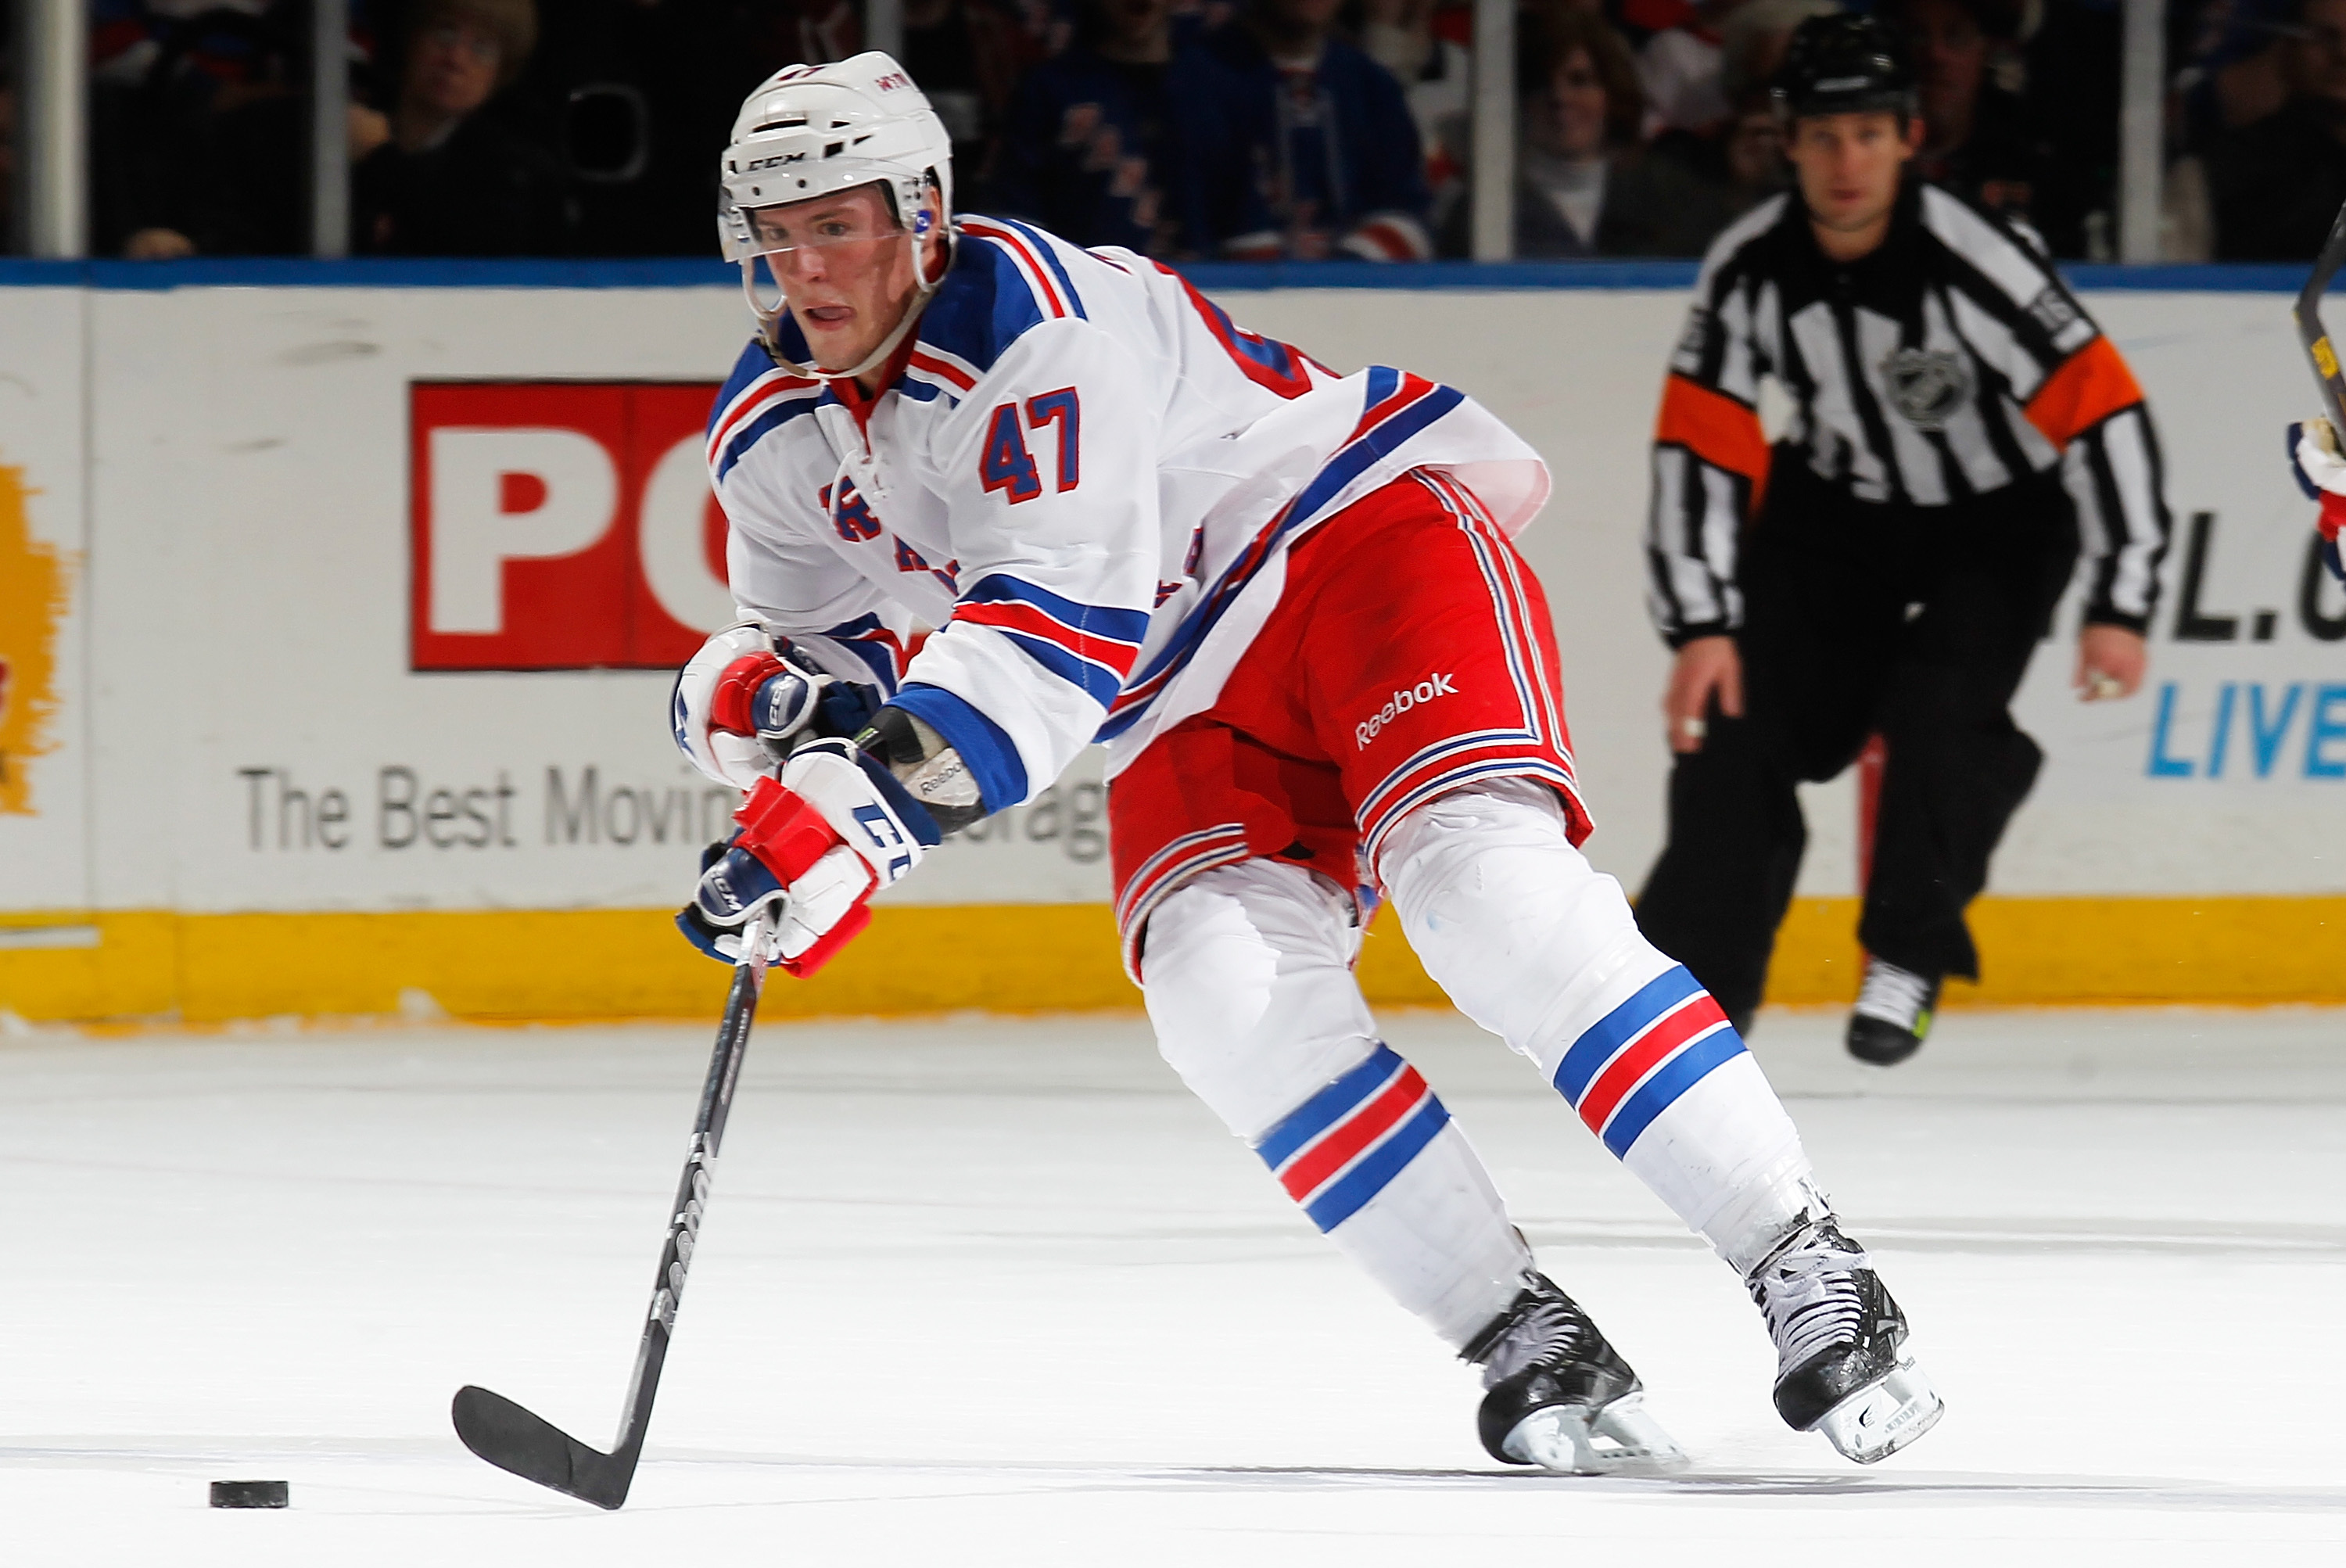 J.T. Miller is better off away from the New York Rangers